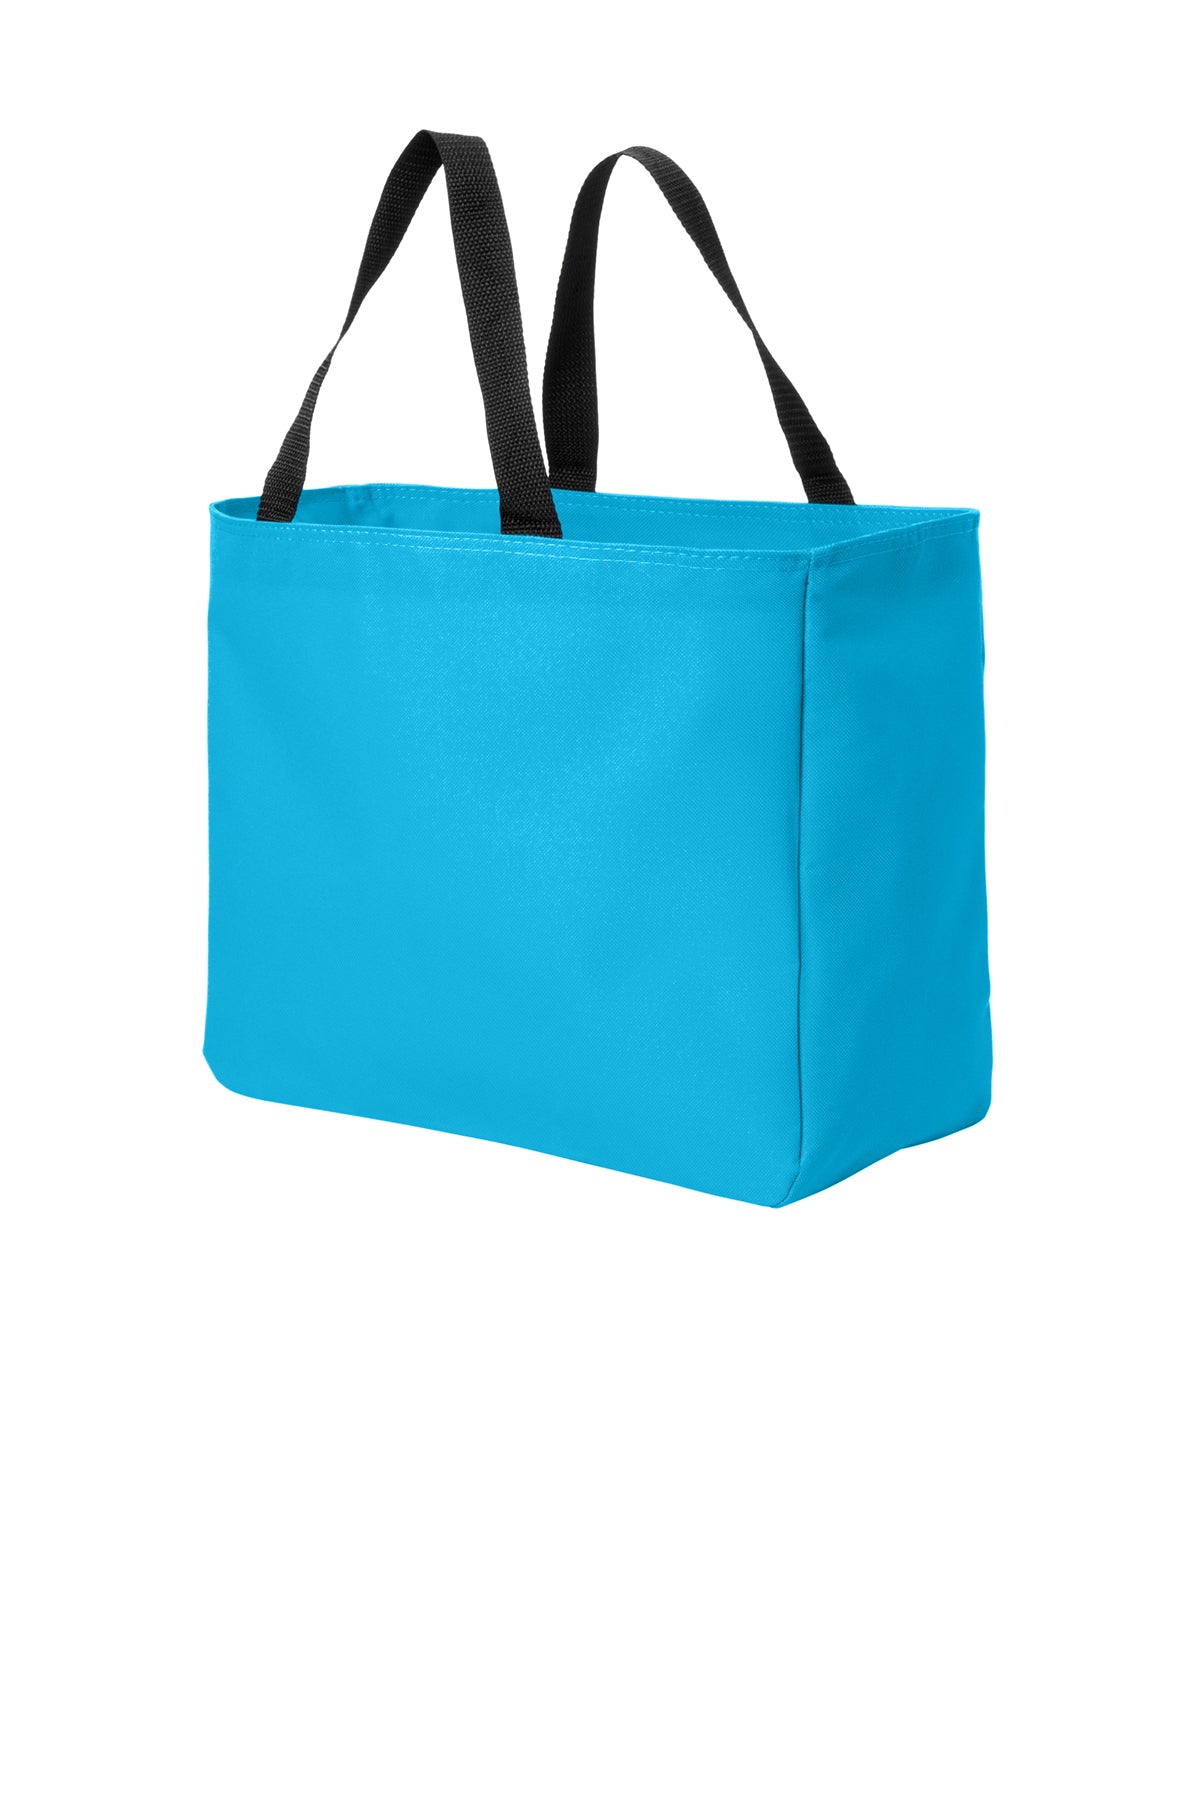 Port Authority - Essential Customized Tote, Turquoise